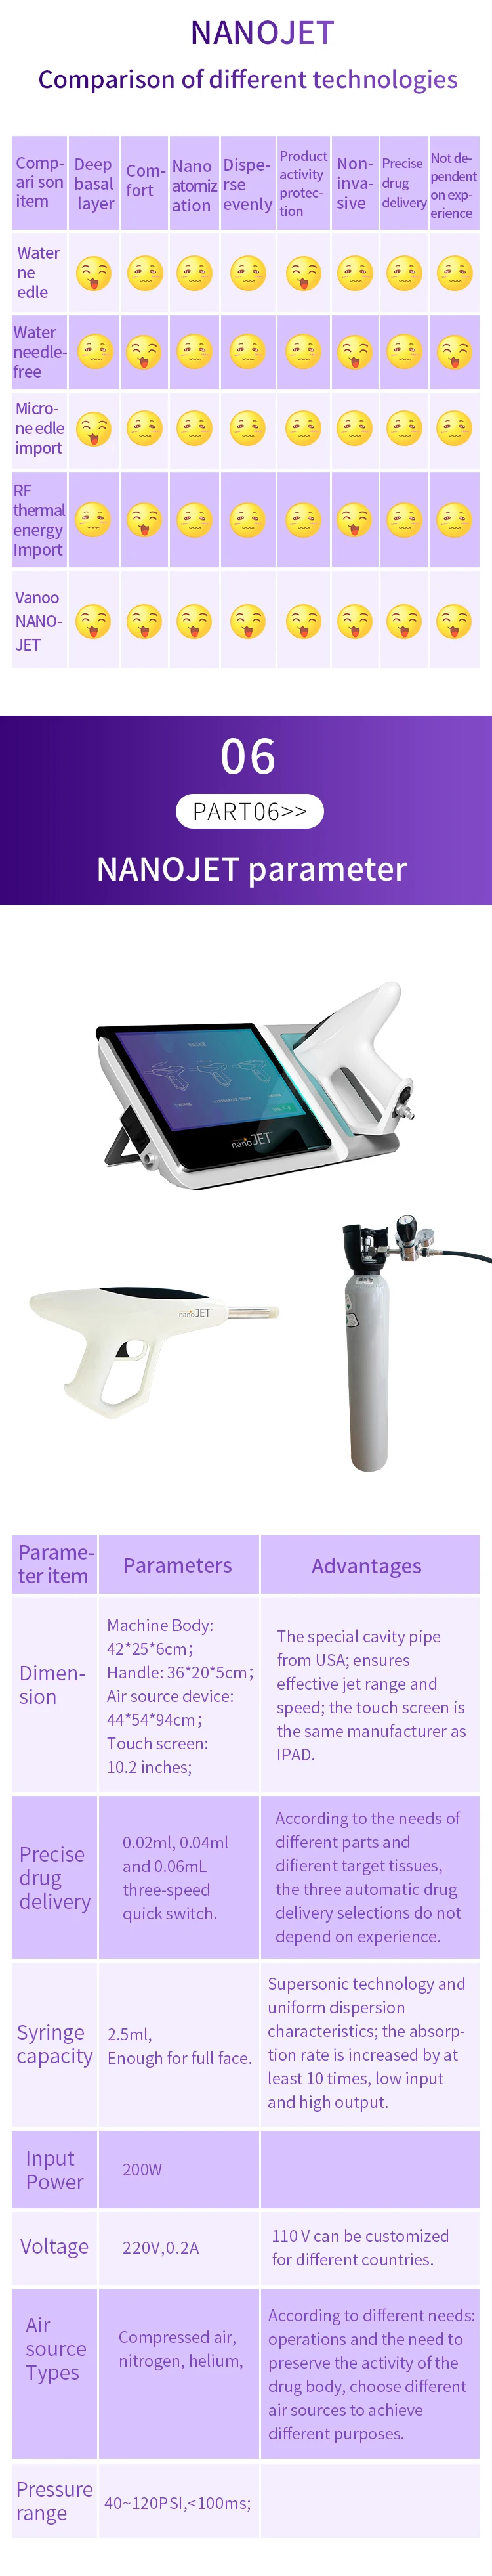 Shanghai Vanoo Hypersonic 560m/s technology my jet jet peel Nano-JeT MESOTHERAPY gun for HA Ampoule MESO products delivery